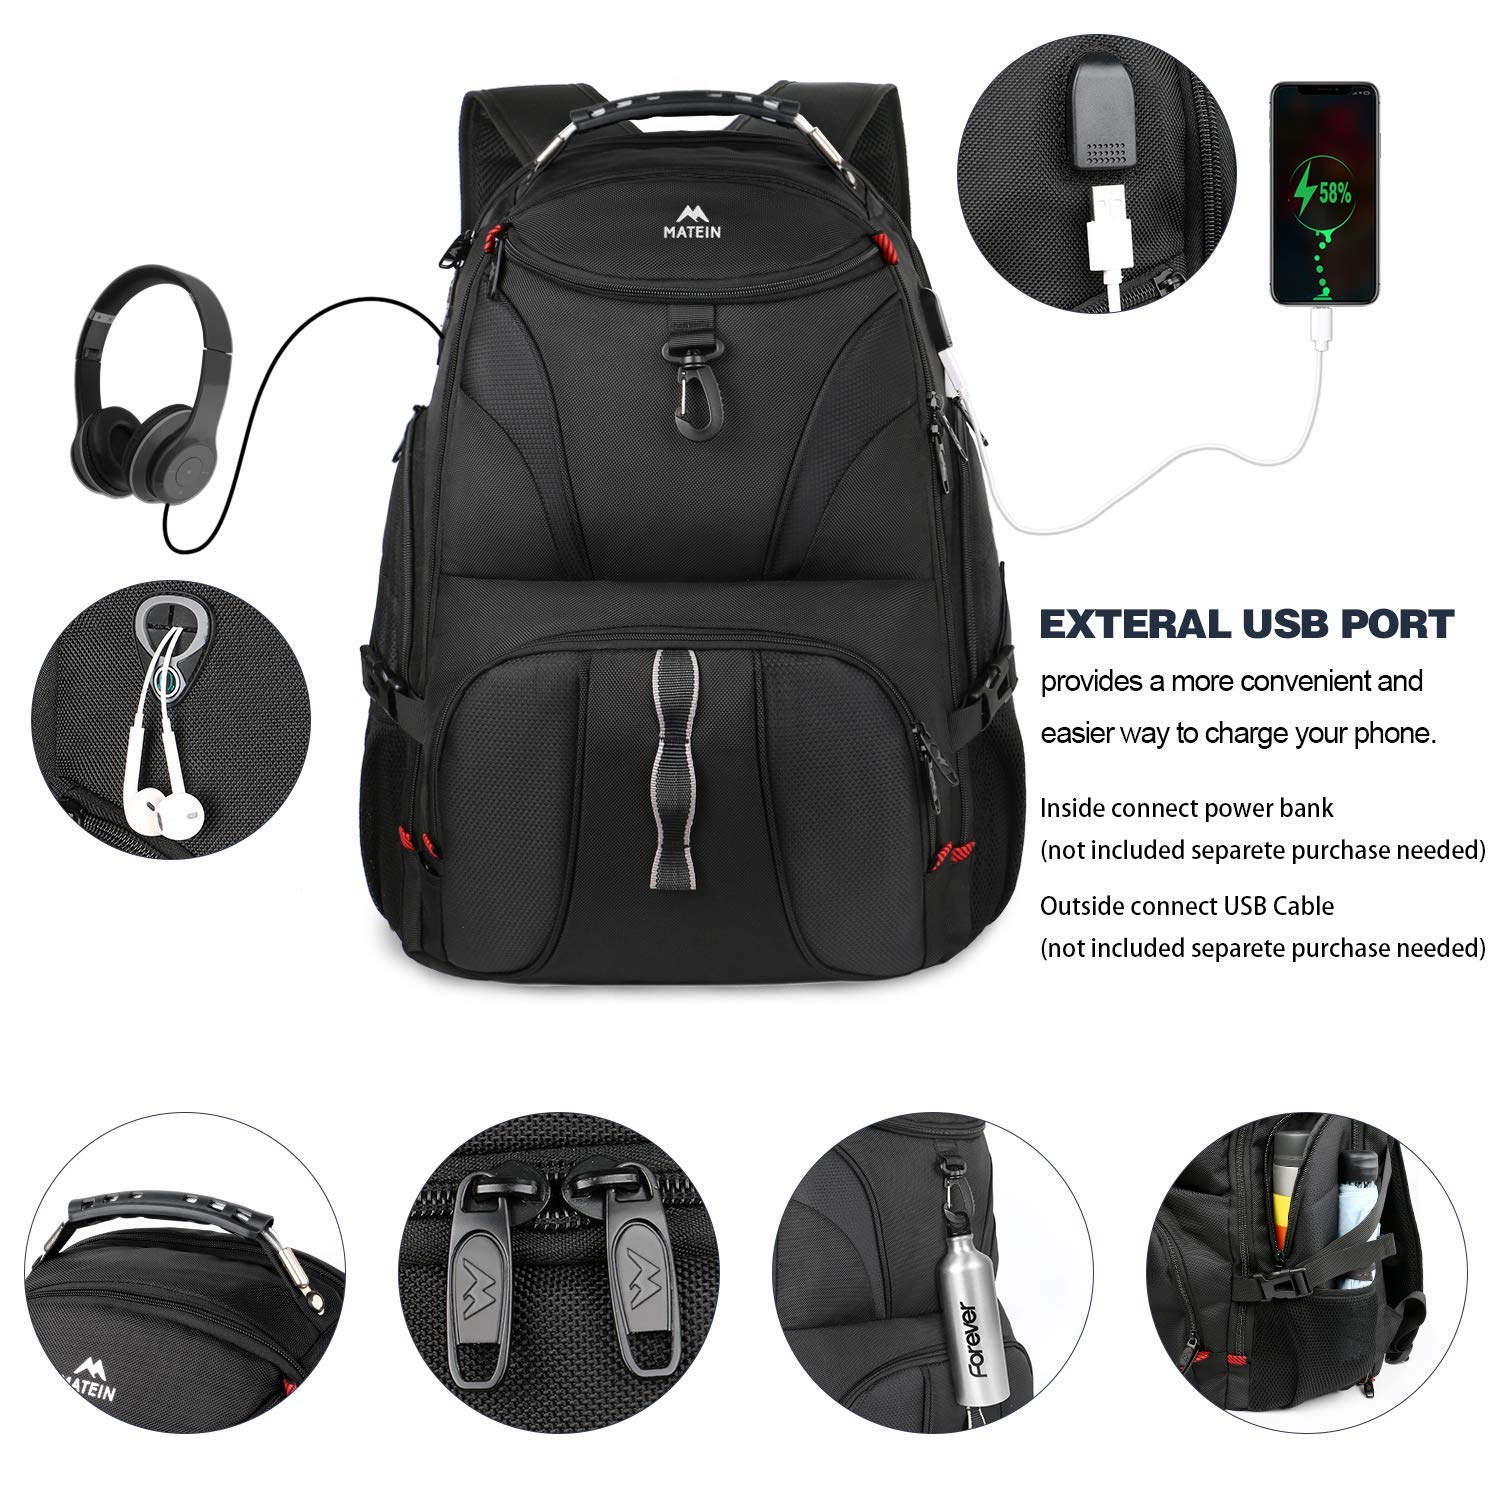 MATEIN Lunch Backpack for Men, 17 Inch Travel Laptop Backpack Insulated Cooler Bag Lunch box Rucksack, Backpack for Men, Large Laptop Backpack with USB Port, Travel Backpacks